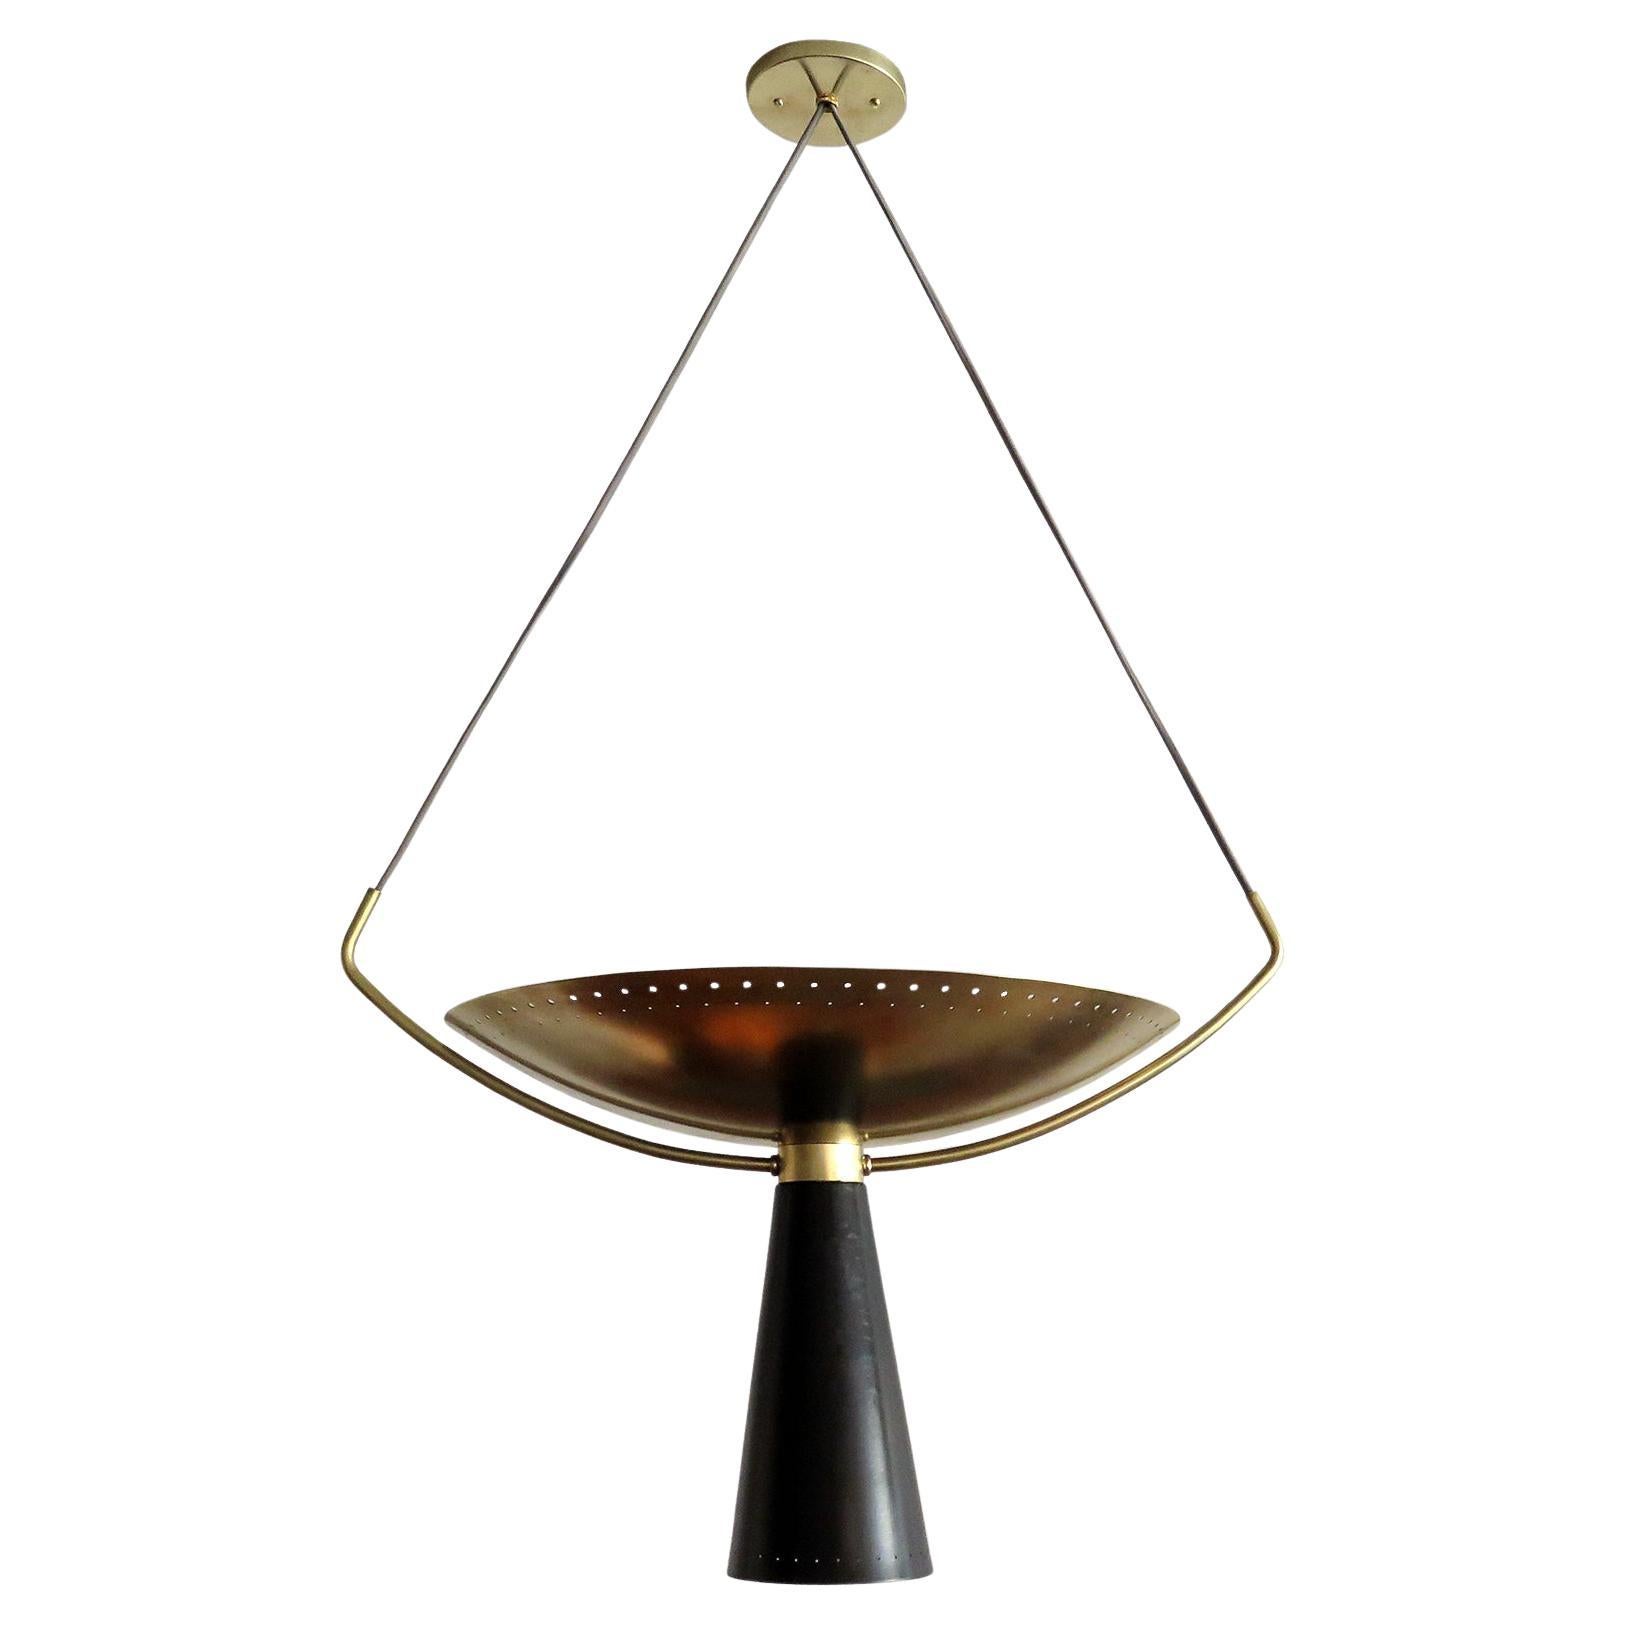 Calice-18 Pendant Light by Gallery L7